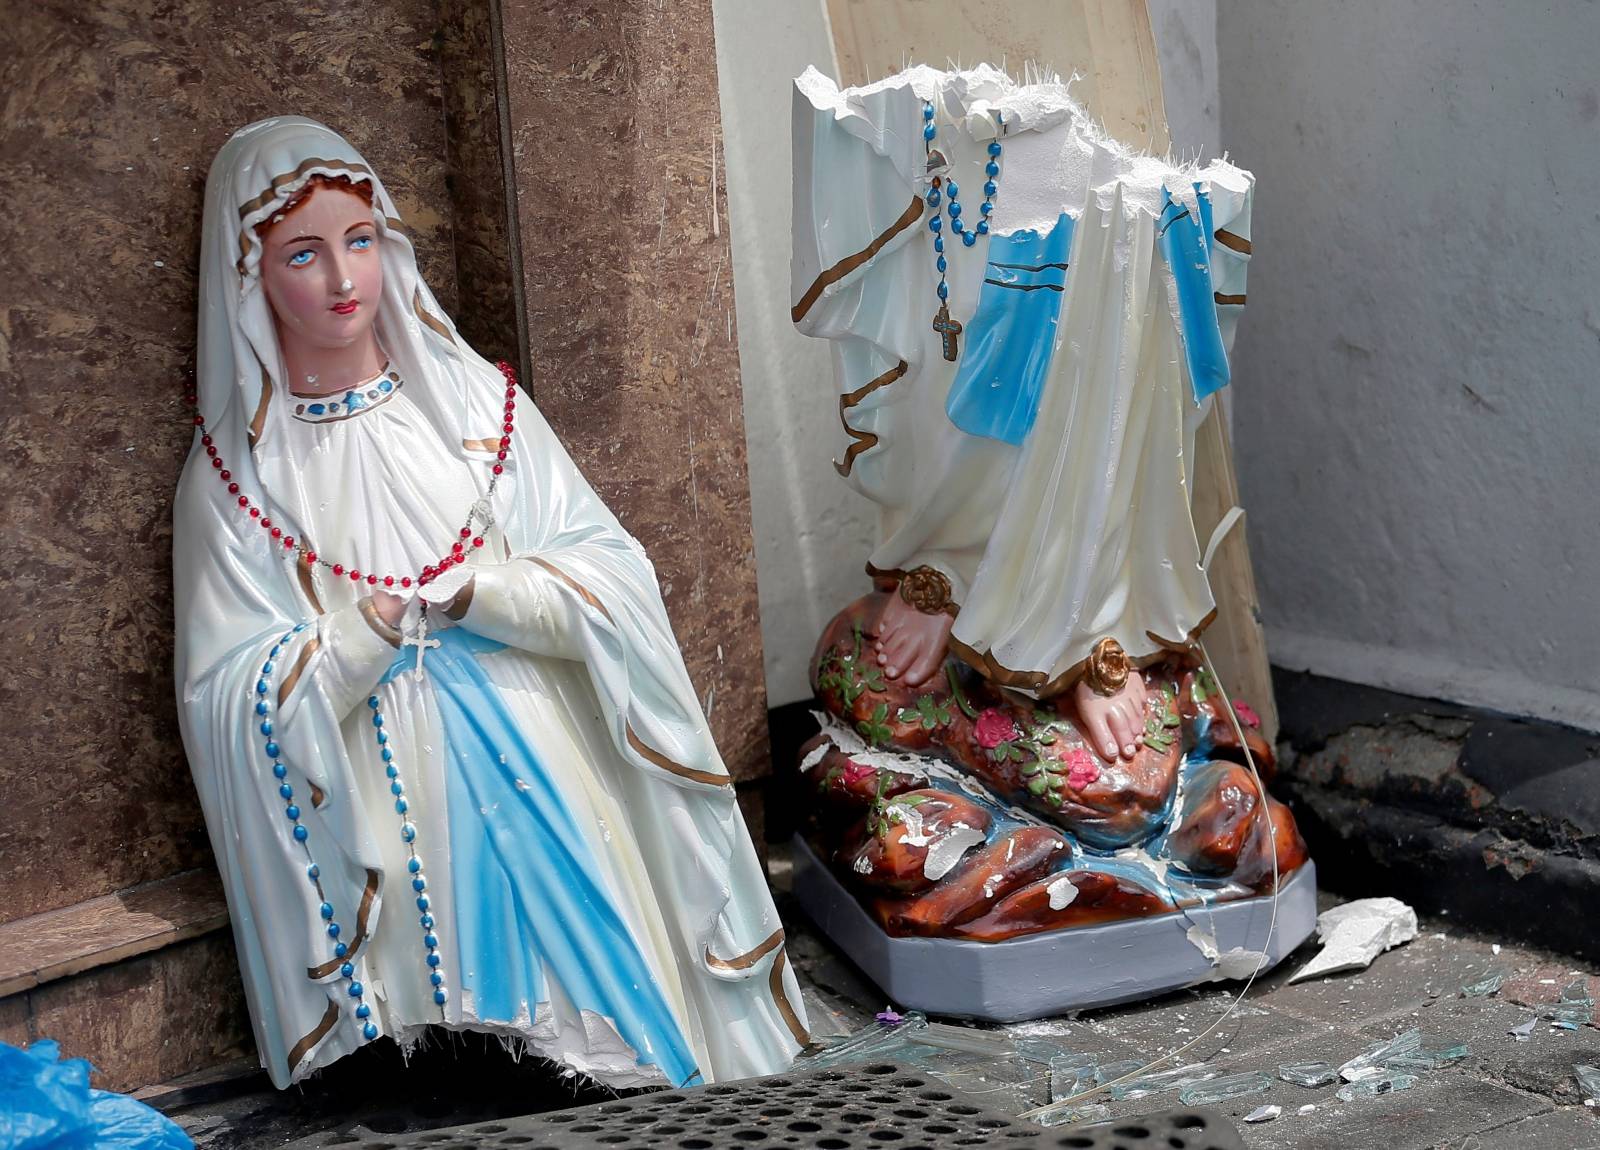 A statue of Virgin Marry broken in two parts is seen in front of the St. Anthony's Shrine, Kochchikade church after an explosion in Colombo